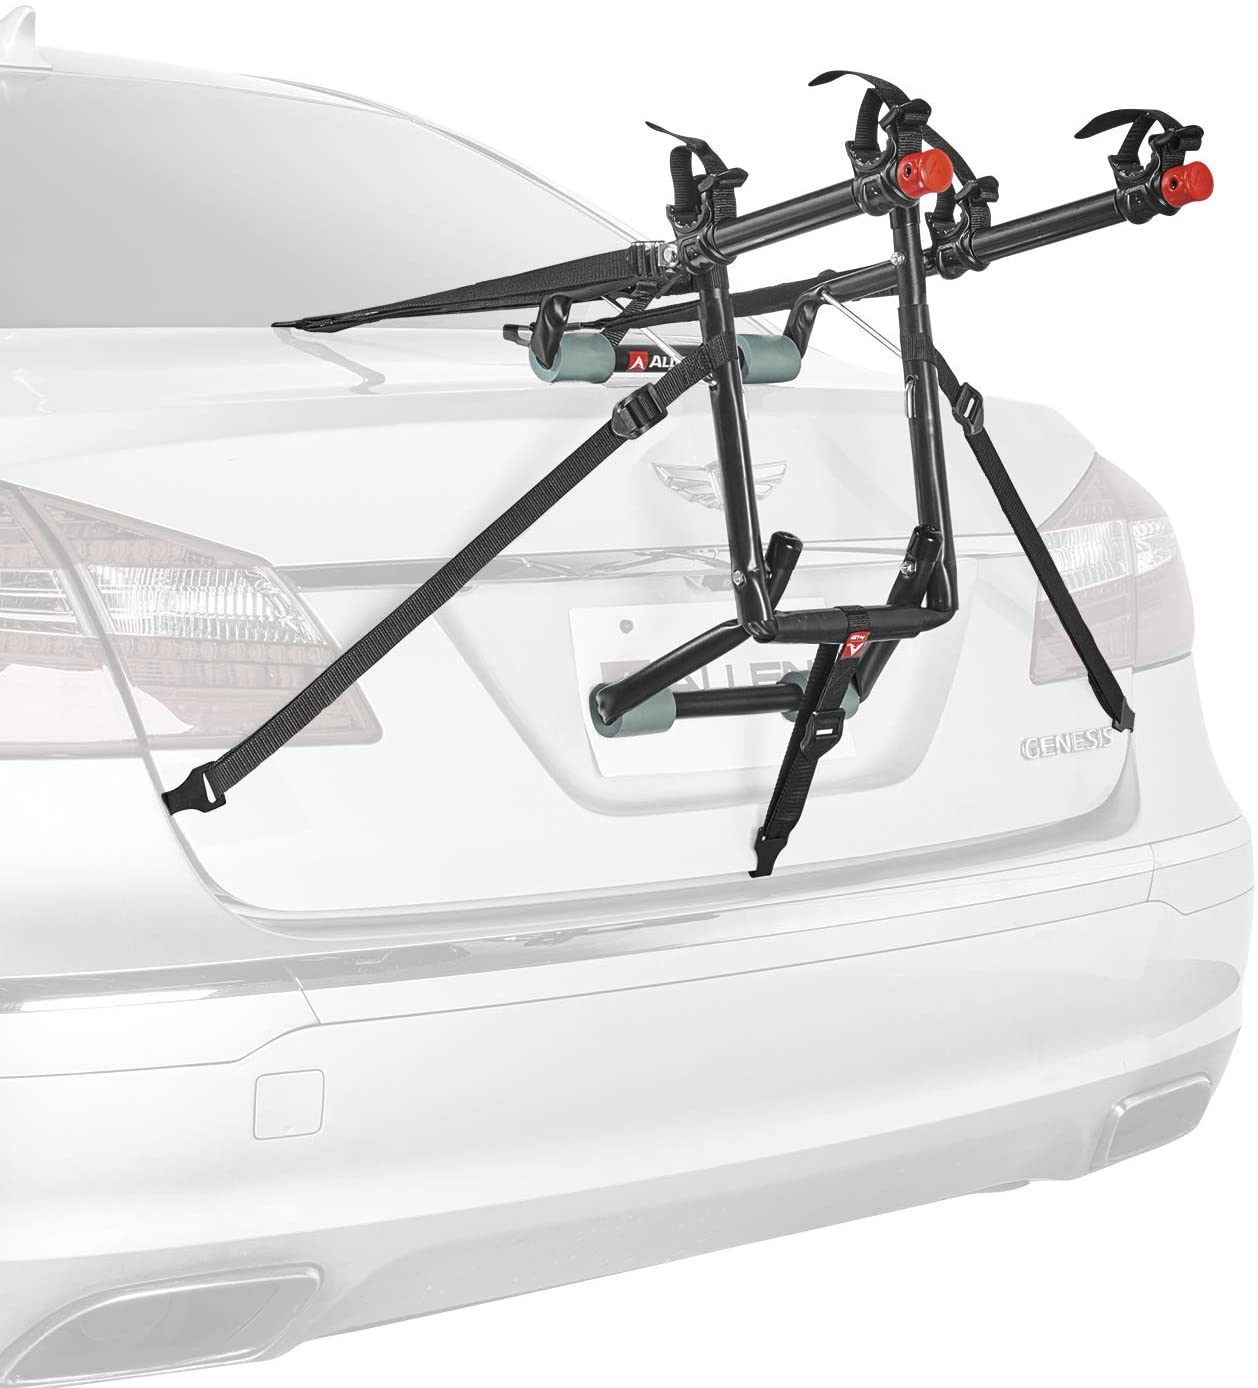 allen-sports-luxury-trunk-frame-can-hold-2-bicycles-2021-6-12-2021-6-12